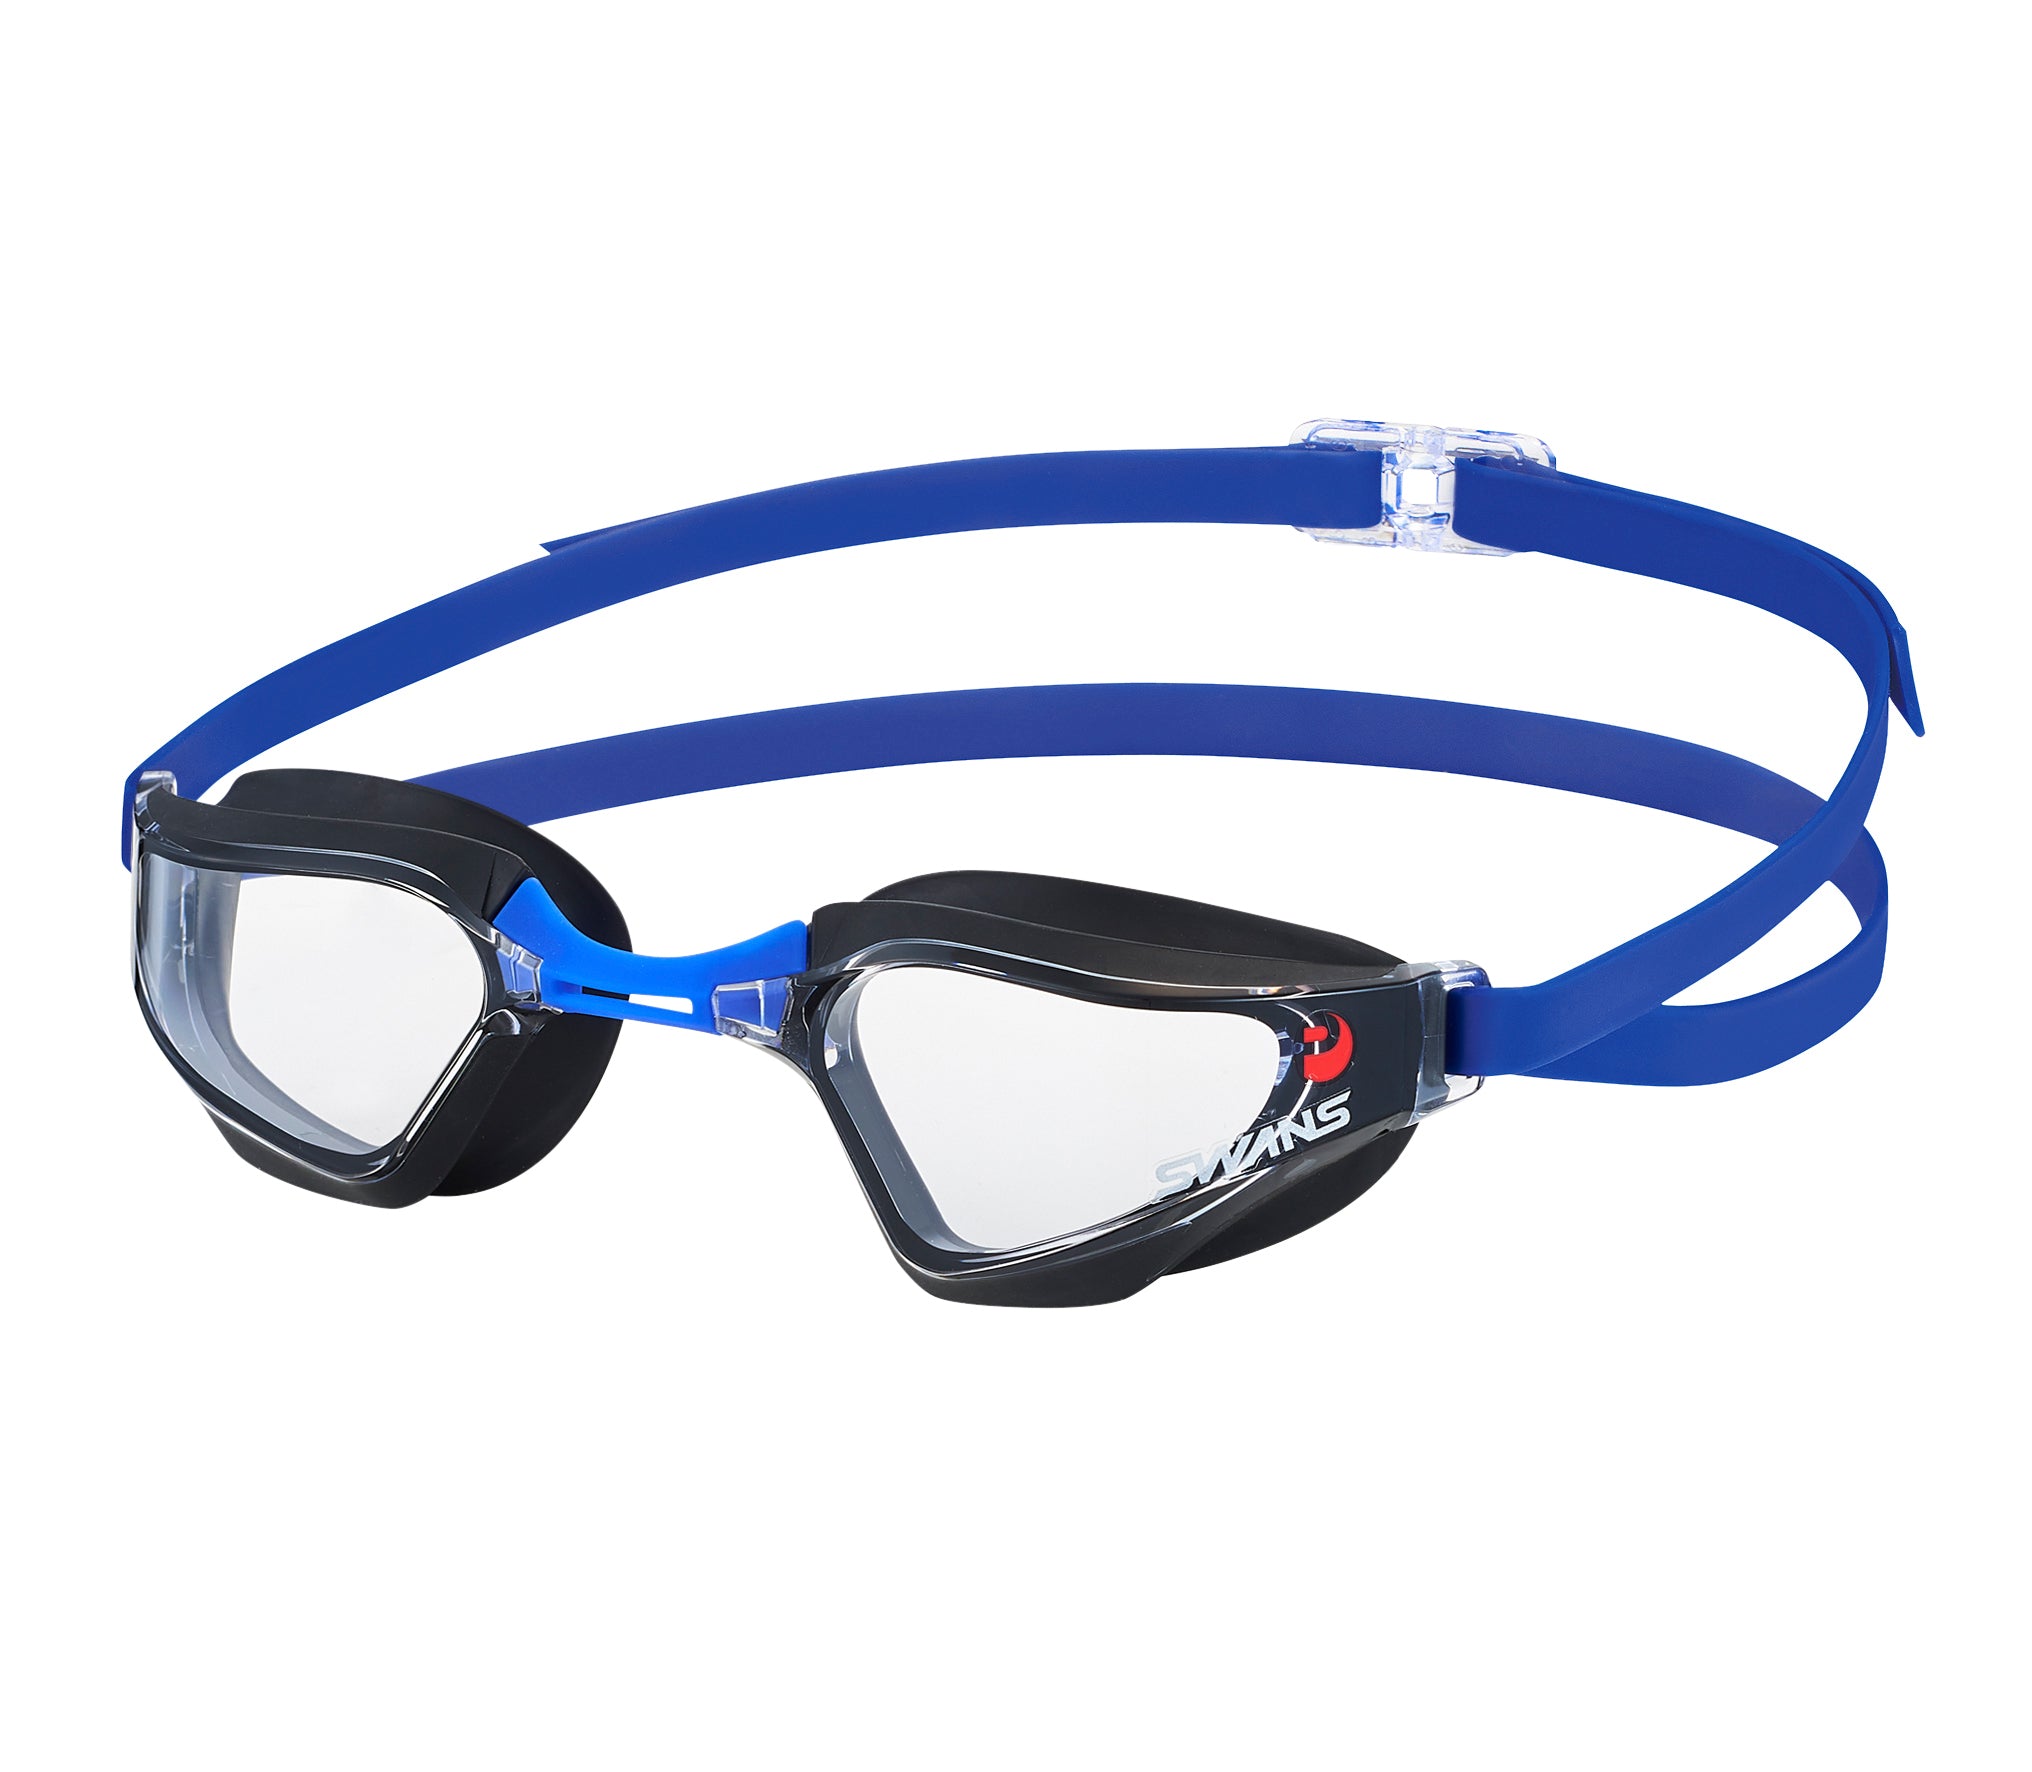 Valkyrie Goggles Black Blue/Clear